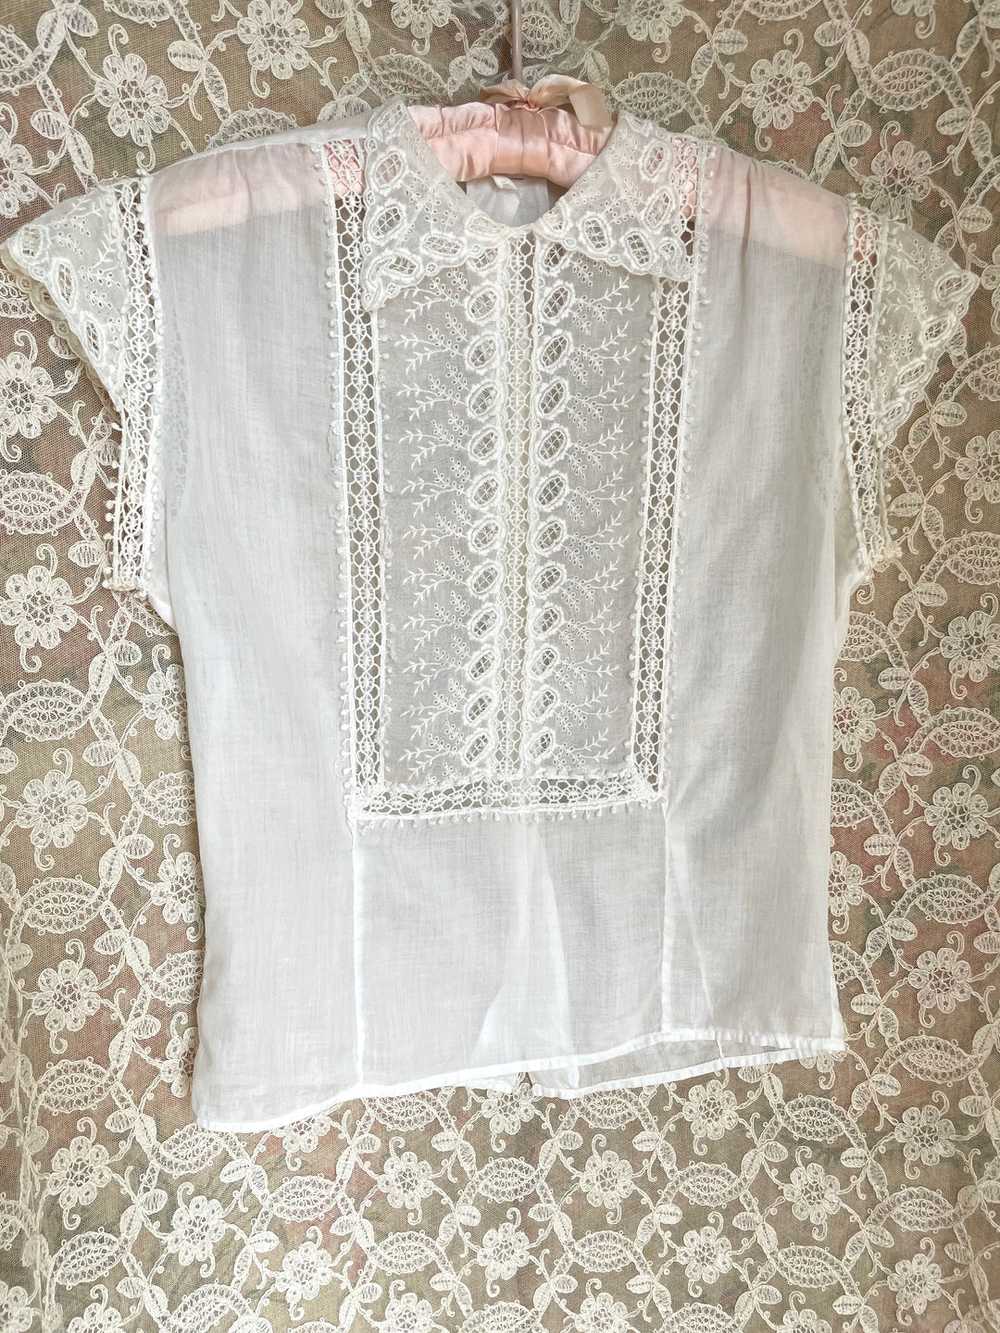 Antique White Cotton Floral Eyelet Collared Cap S… - image 7